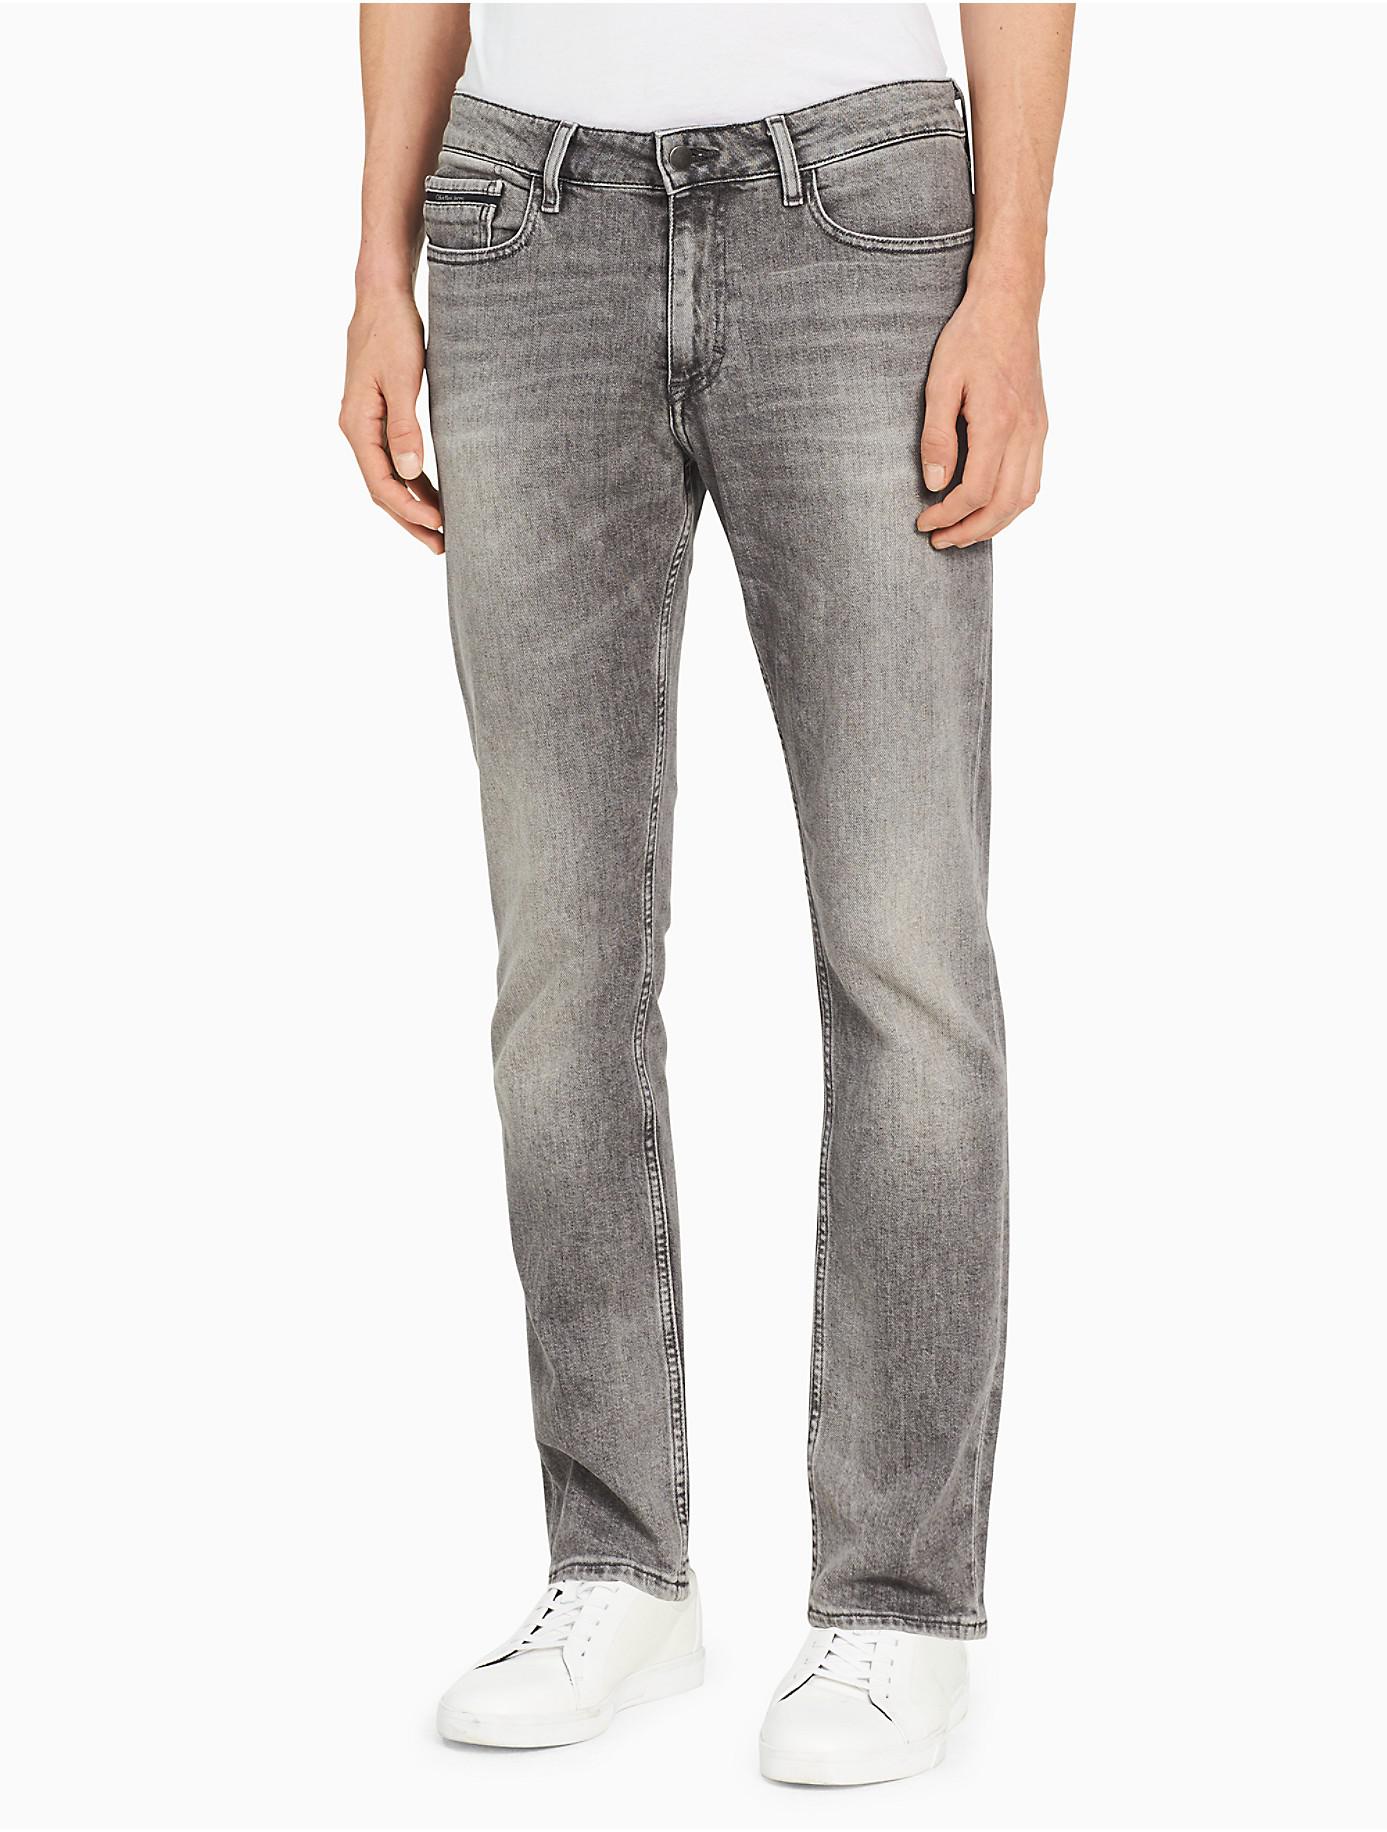 Calvin Klein Slim Straight Faded Grey Jeans in Gray for Men | Lyst